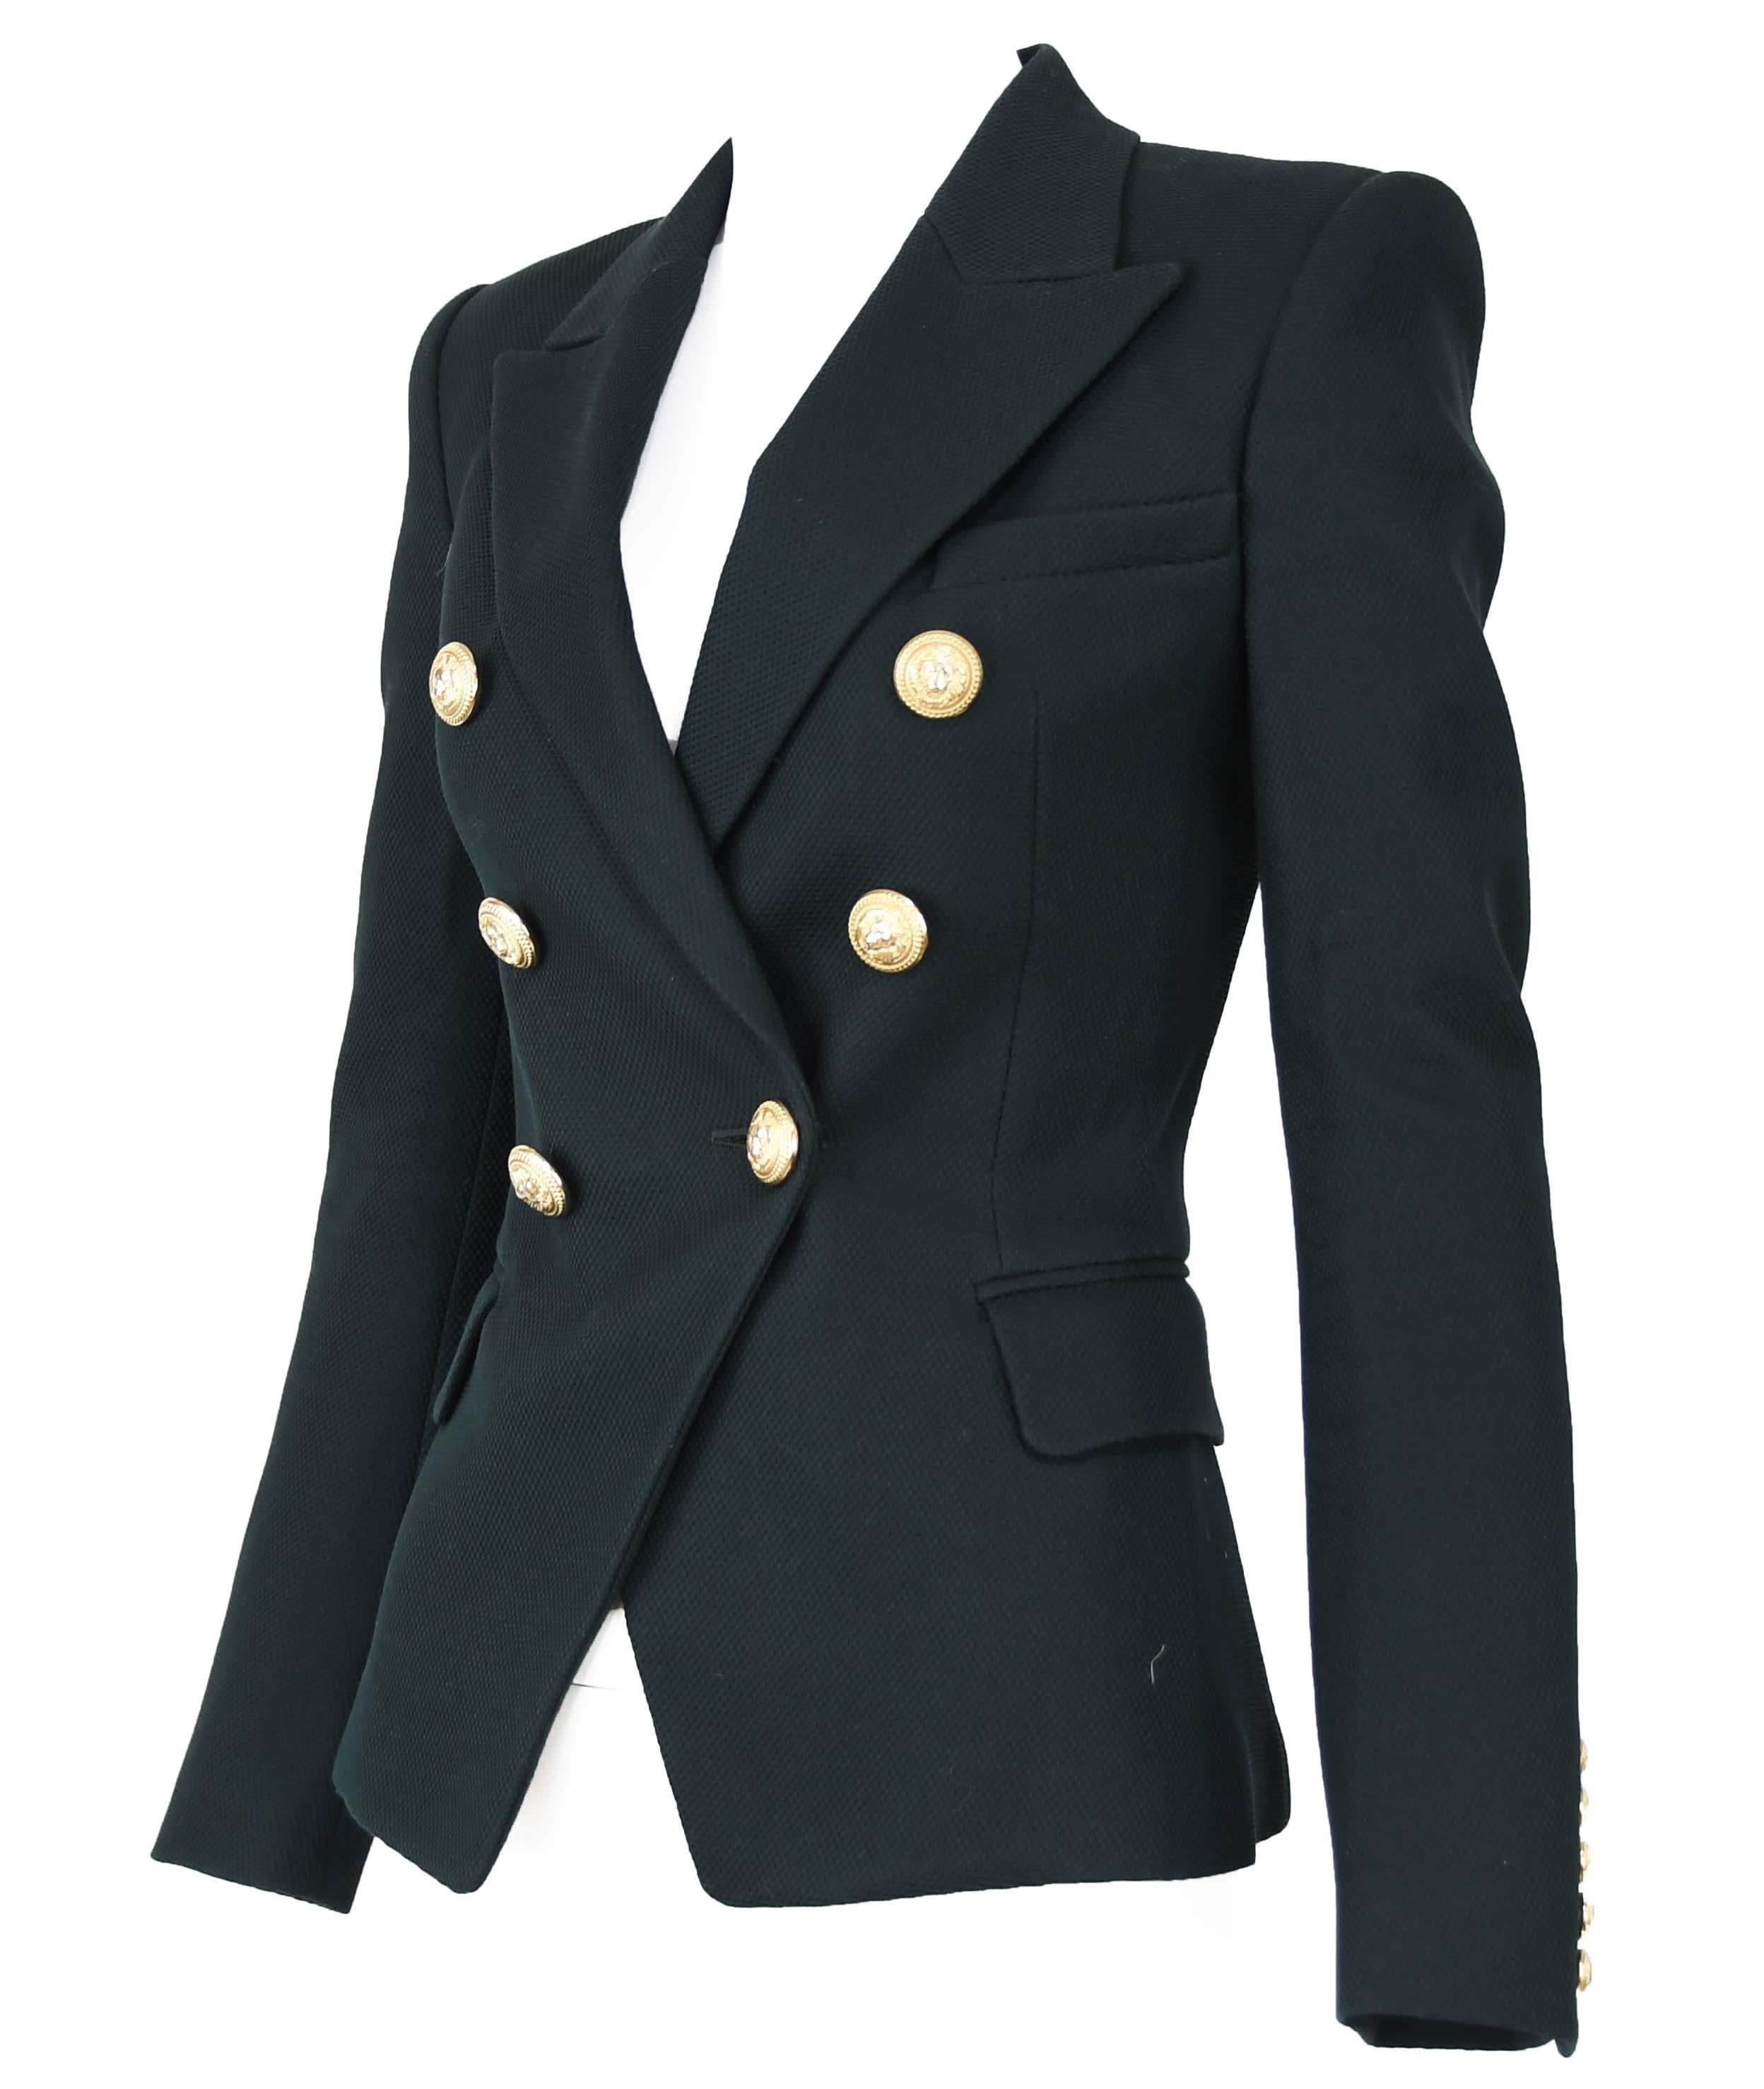 Balmain black pique double breasted blazer with gold Indian buttons.  

Size: FR 34

Condition: Brand new with original tags

Composition: 100% cotton / (lining) 52% viscose, 48% cotton

Care: Dry clean only

Made in Slovaqia